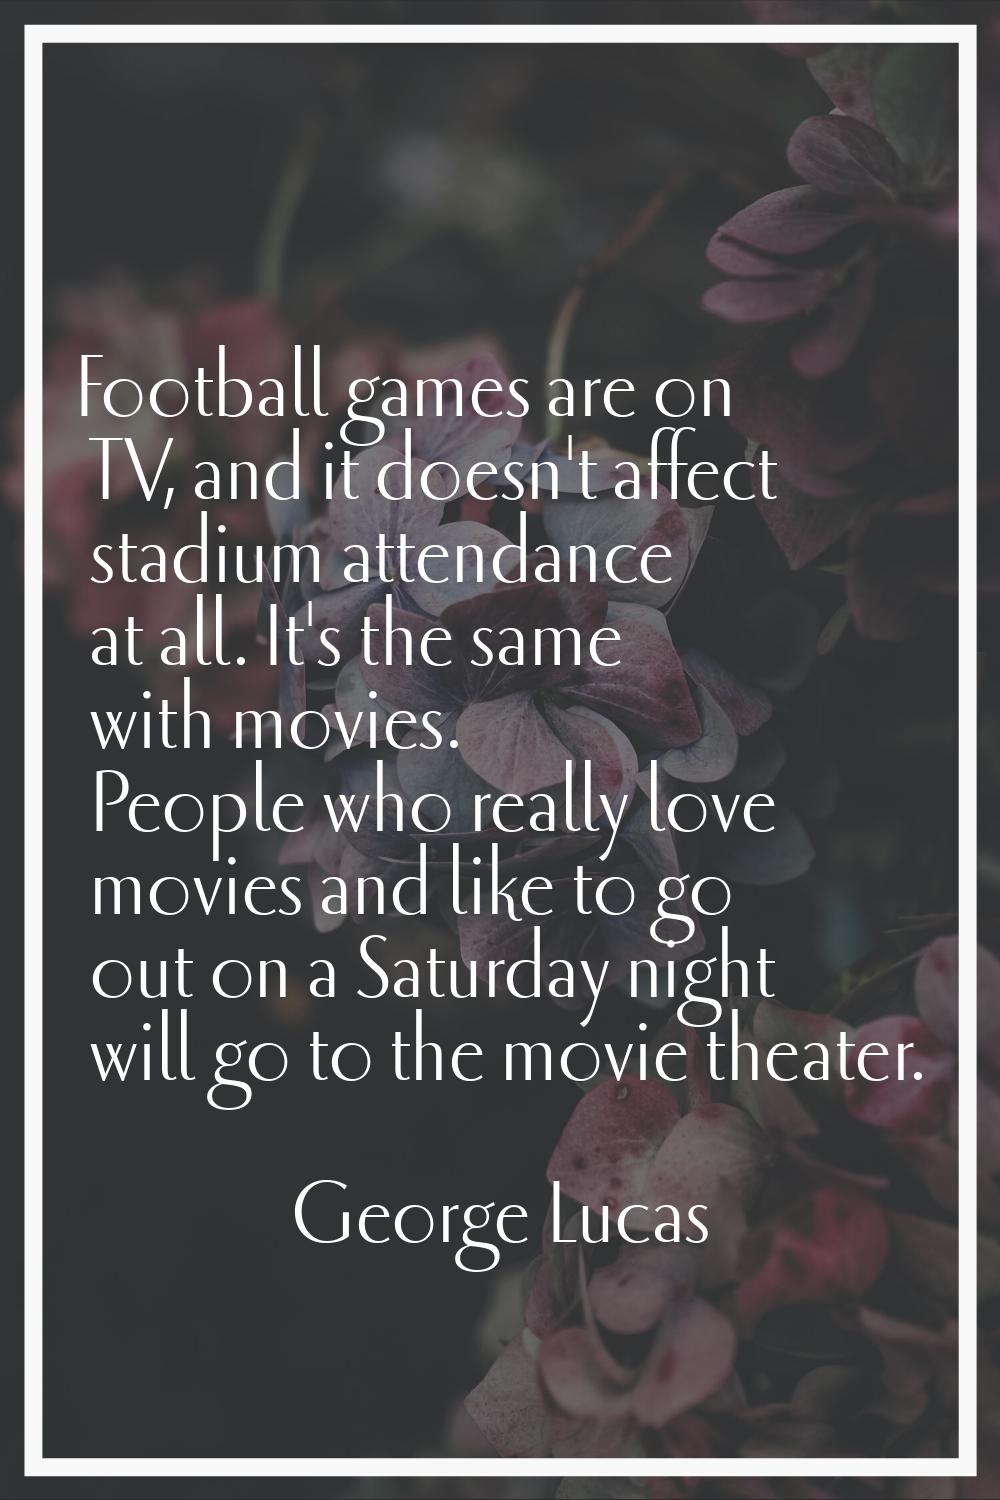 Football games are on TV, and it doesn't affect stadium attendance at all. It's the same with movie